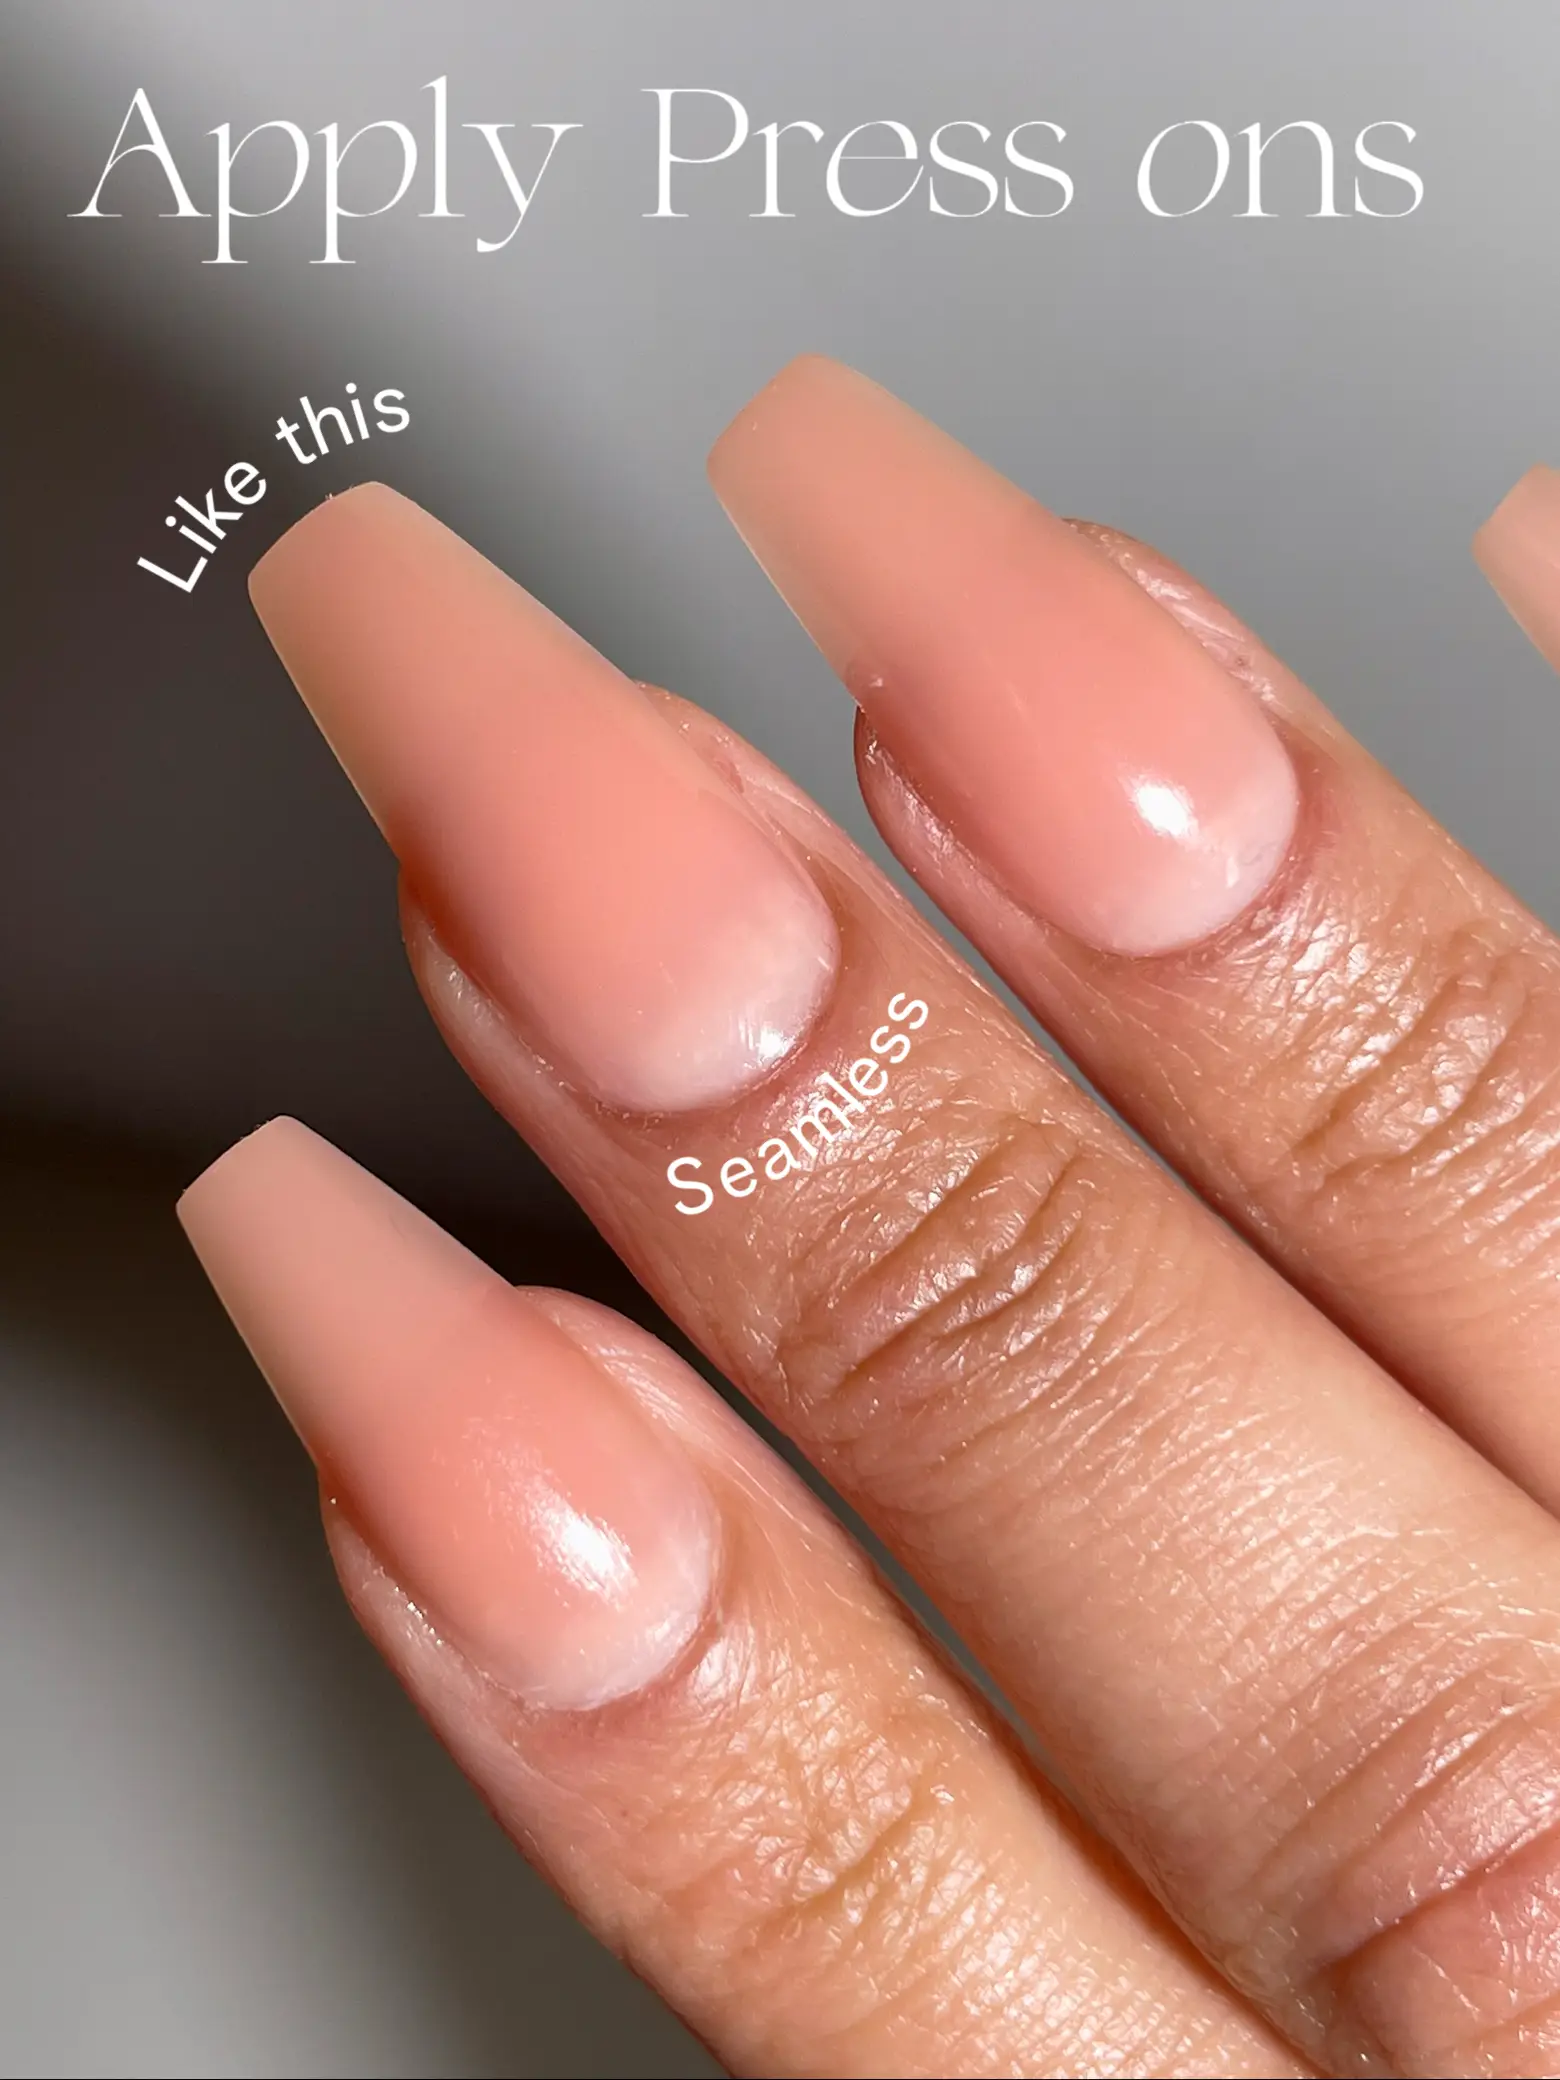 INVISIBLE LIFT INSERTS, ARE A GAME CHANGER😍 SHADE - caramel